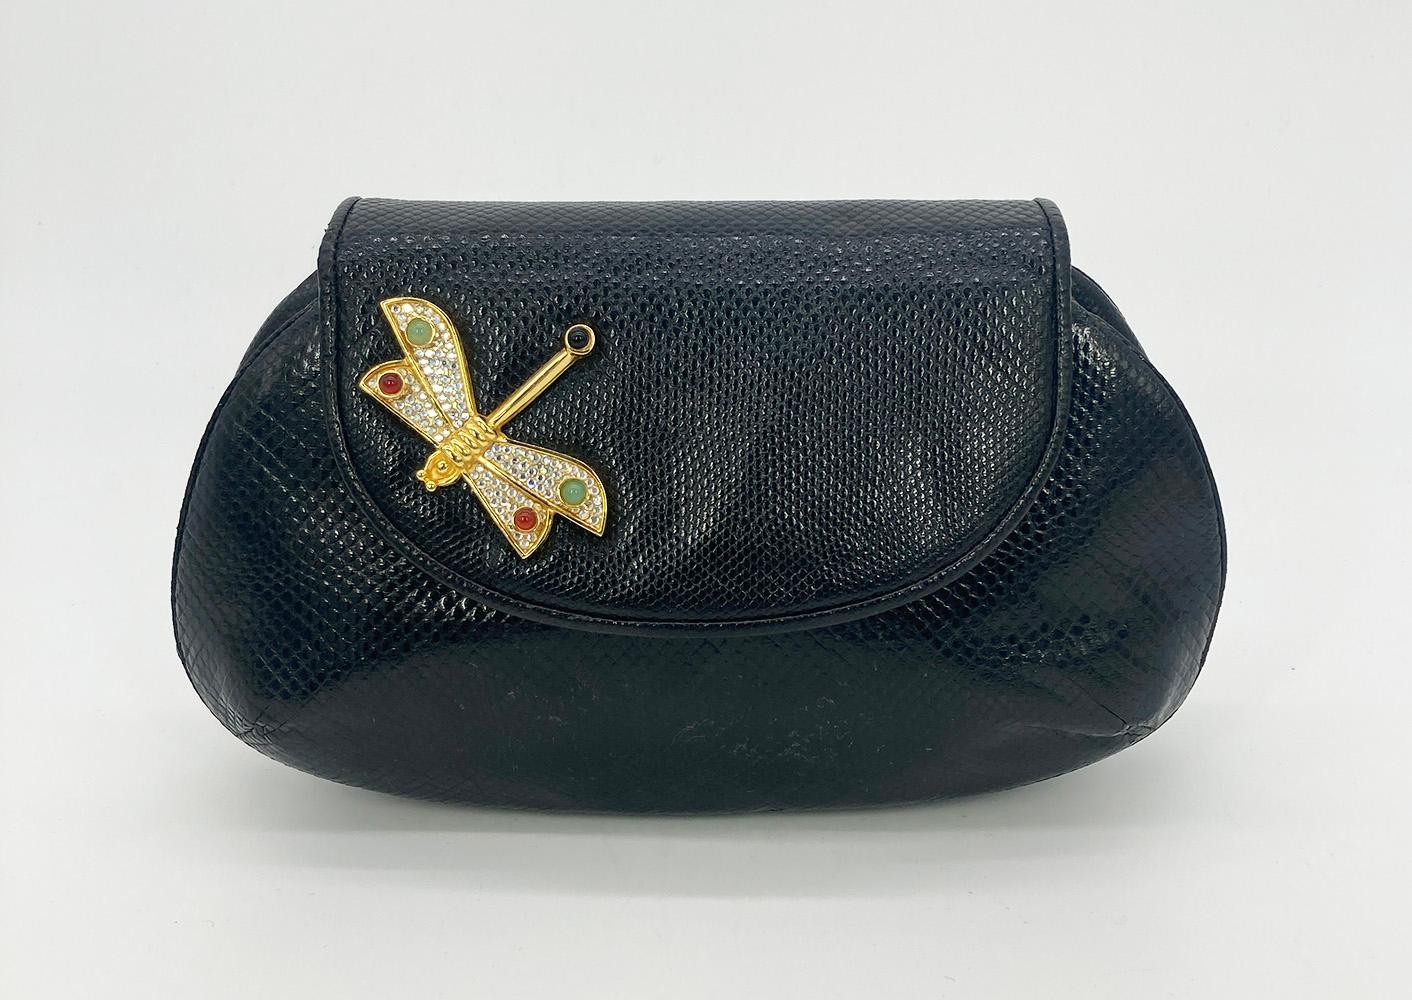 Judith Leiber Black Lizard Dragonfly Clutch in excellent condition. Black lizard exterior trimmed with a gold dragonfly embellished in crystals and gemstones. Back side slit pocket. Top flap with magnetic snap closure opens to a black nylon interior